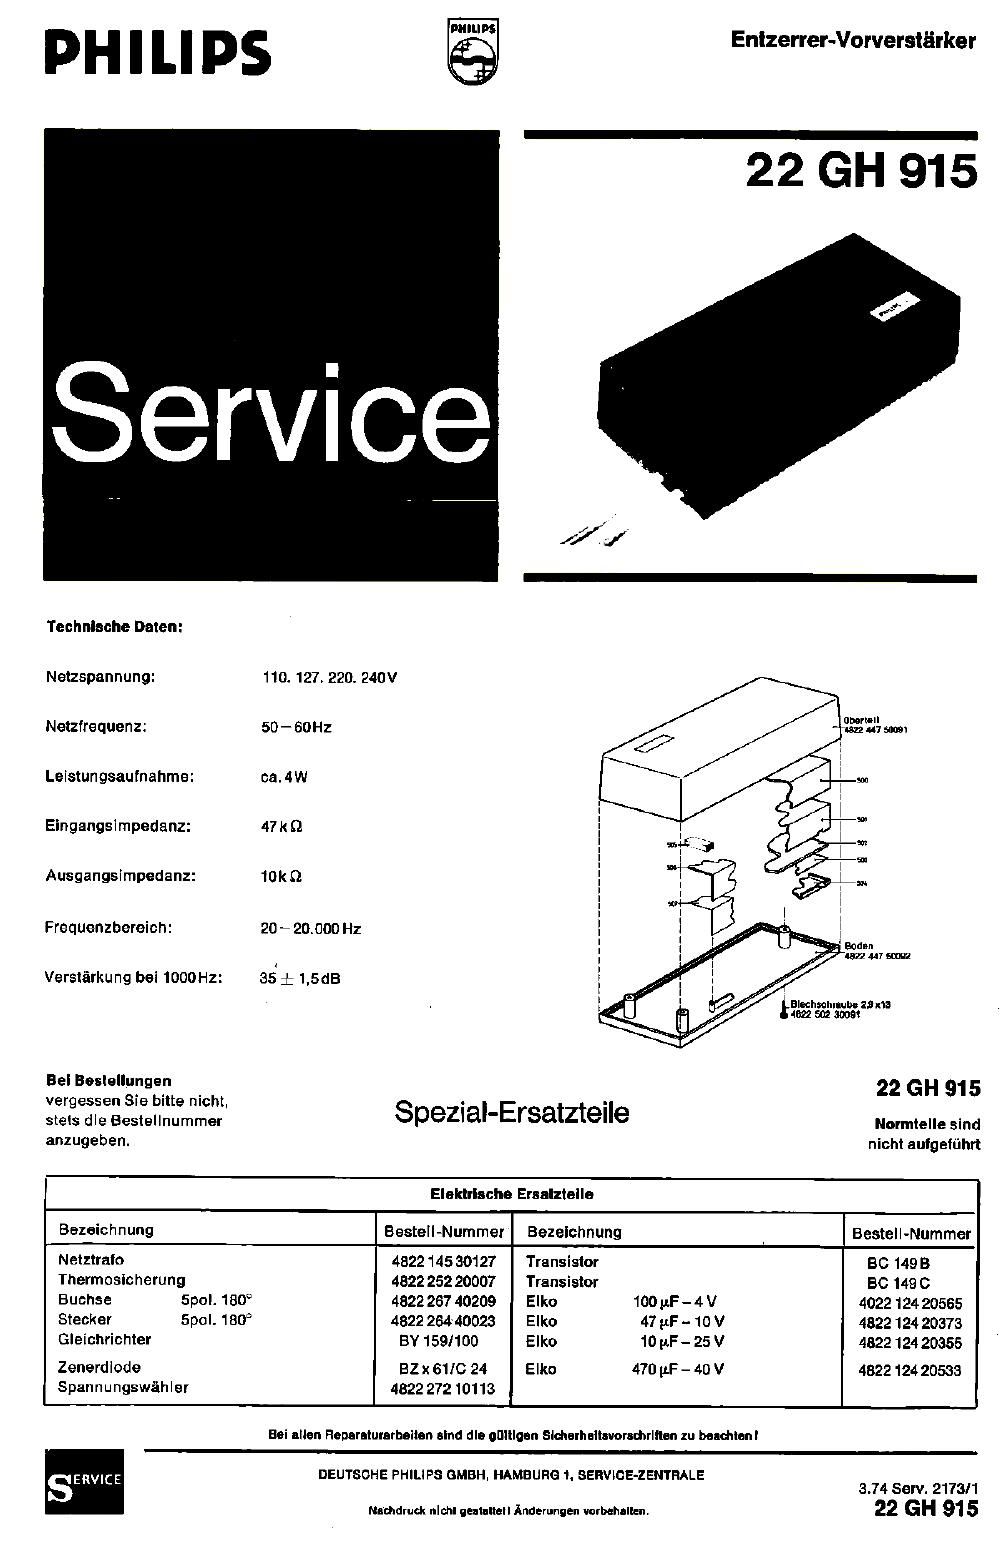 philips 22 gh 915 service manual